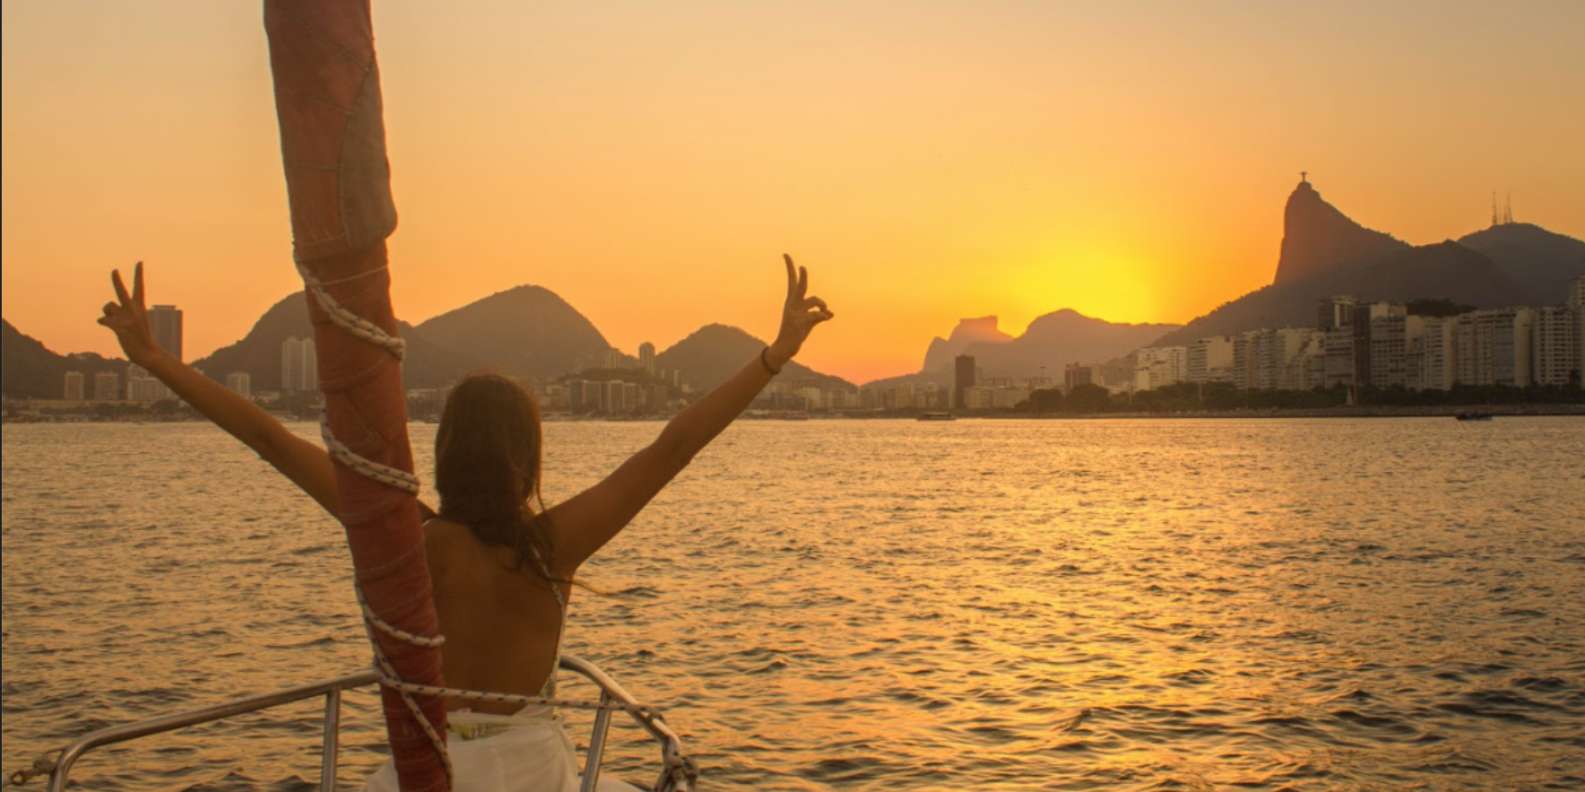 What to do in Niteroi